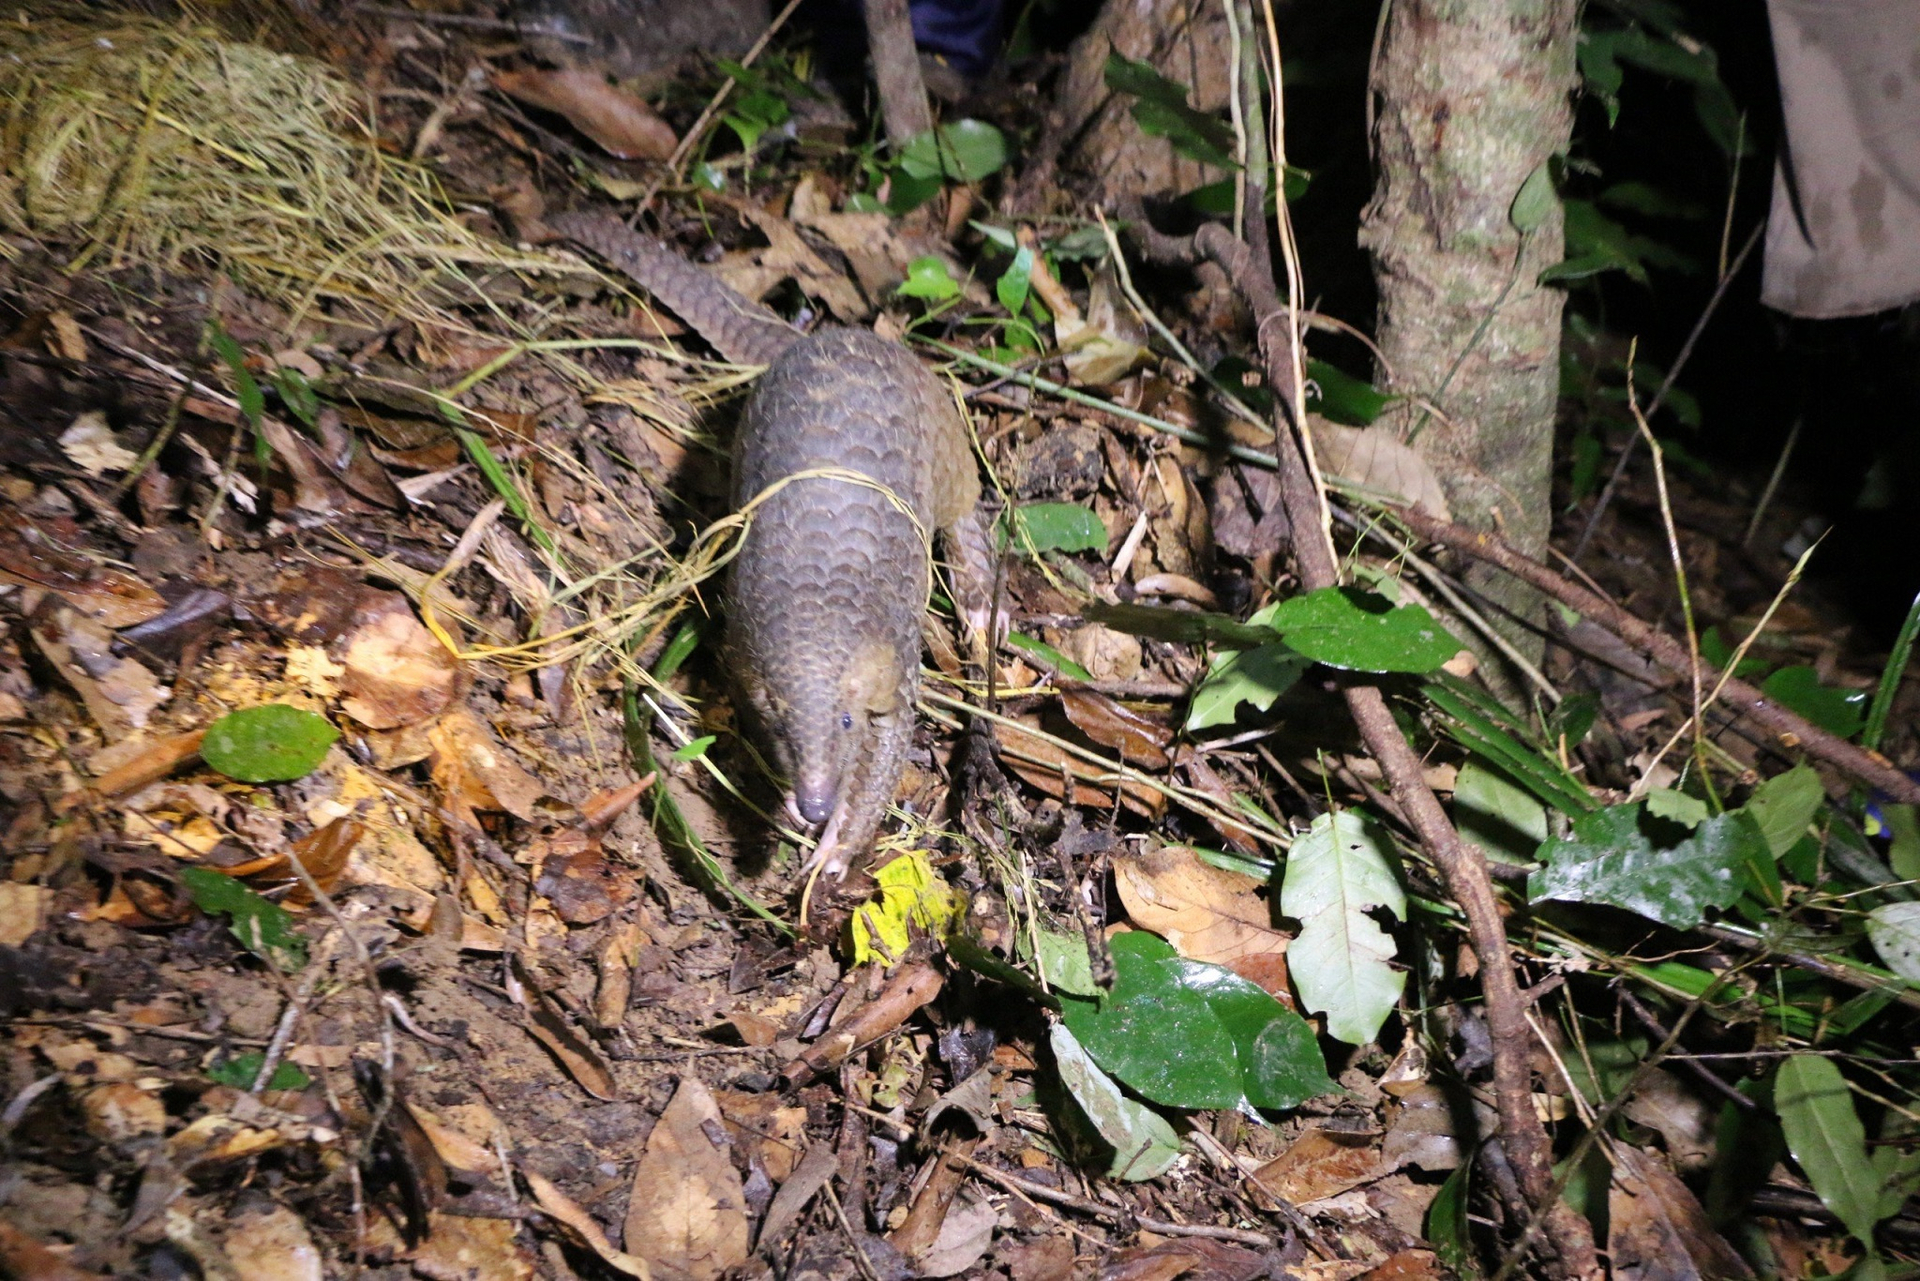 The pangolin was rescued and released back into the Annamite forest. Photo: WWF.